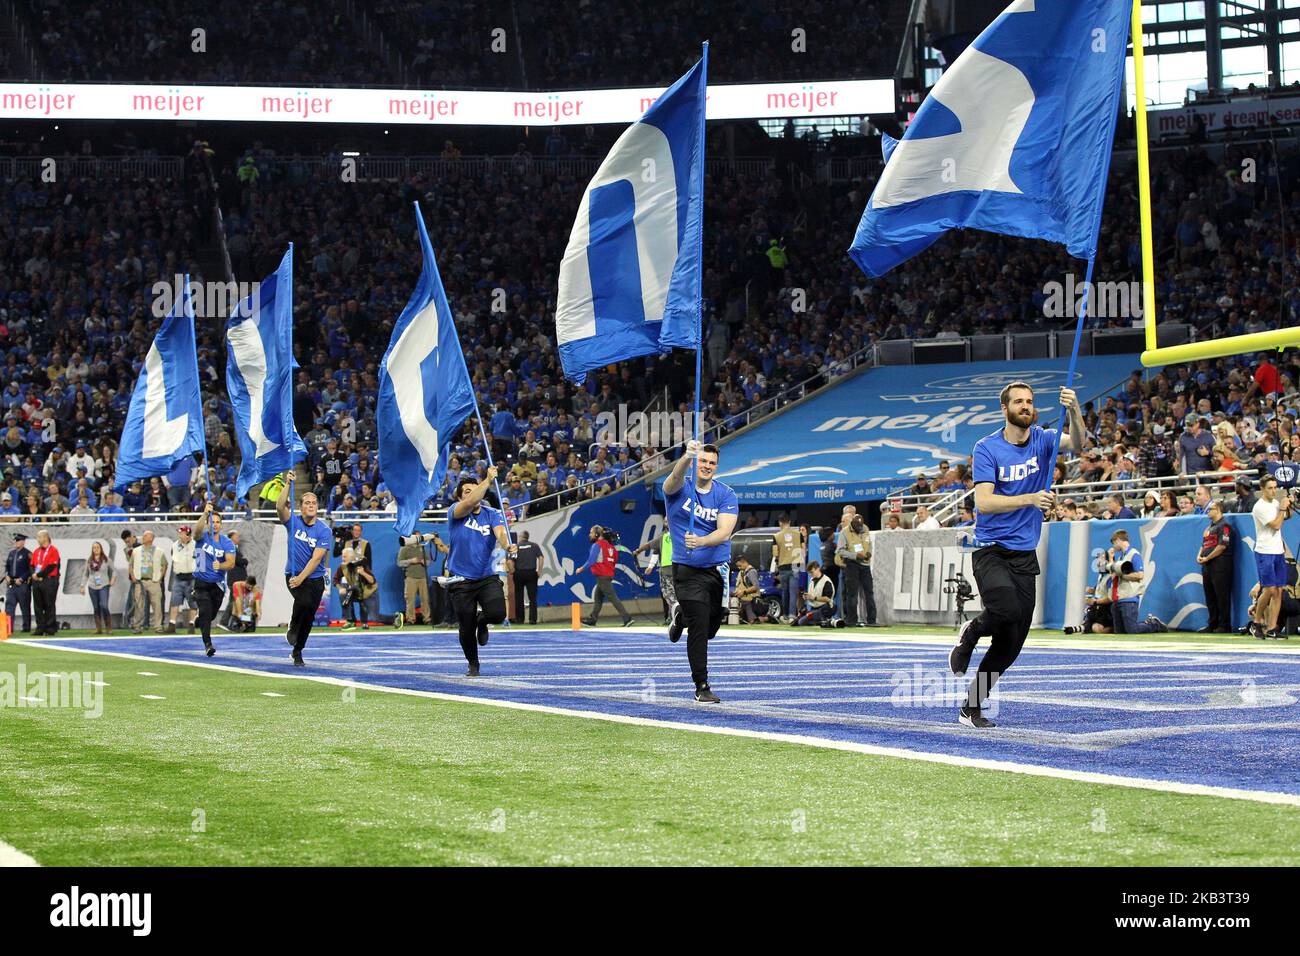 Detroit Lions cheer team runs through the endzone with the Lions flags to celebrate a Detroit three-point field goal during the first half of an NFL football game between the Los Angeles Rams and the Detroit Lions in Detroit, Michigan USA, on Sunday, December 2, 2018. (Photo by Jorge Lemus/NurPhoto) Stock Photo